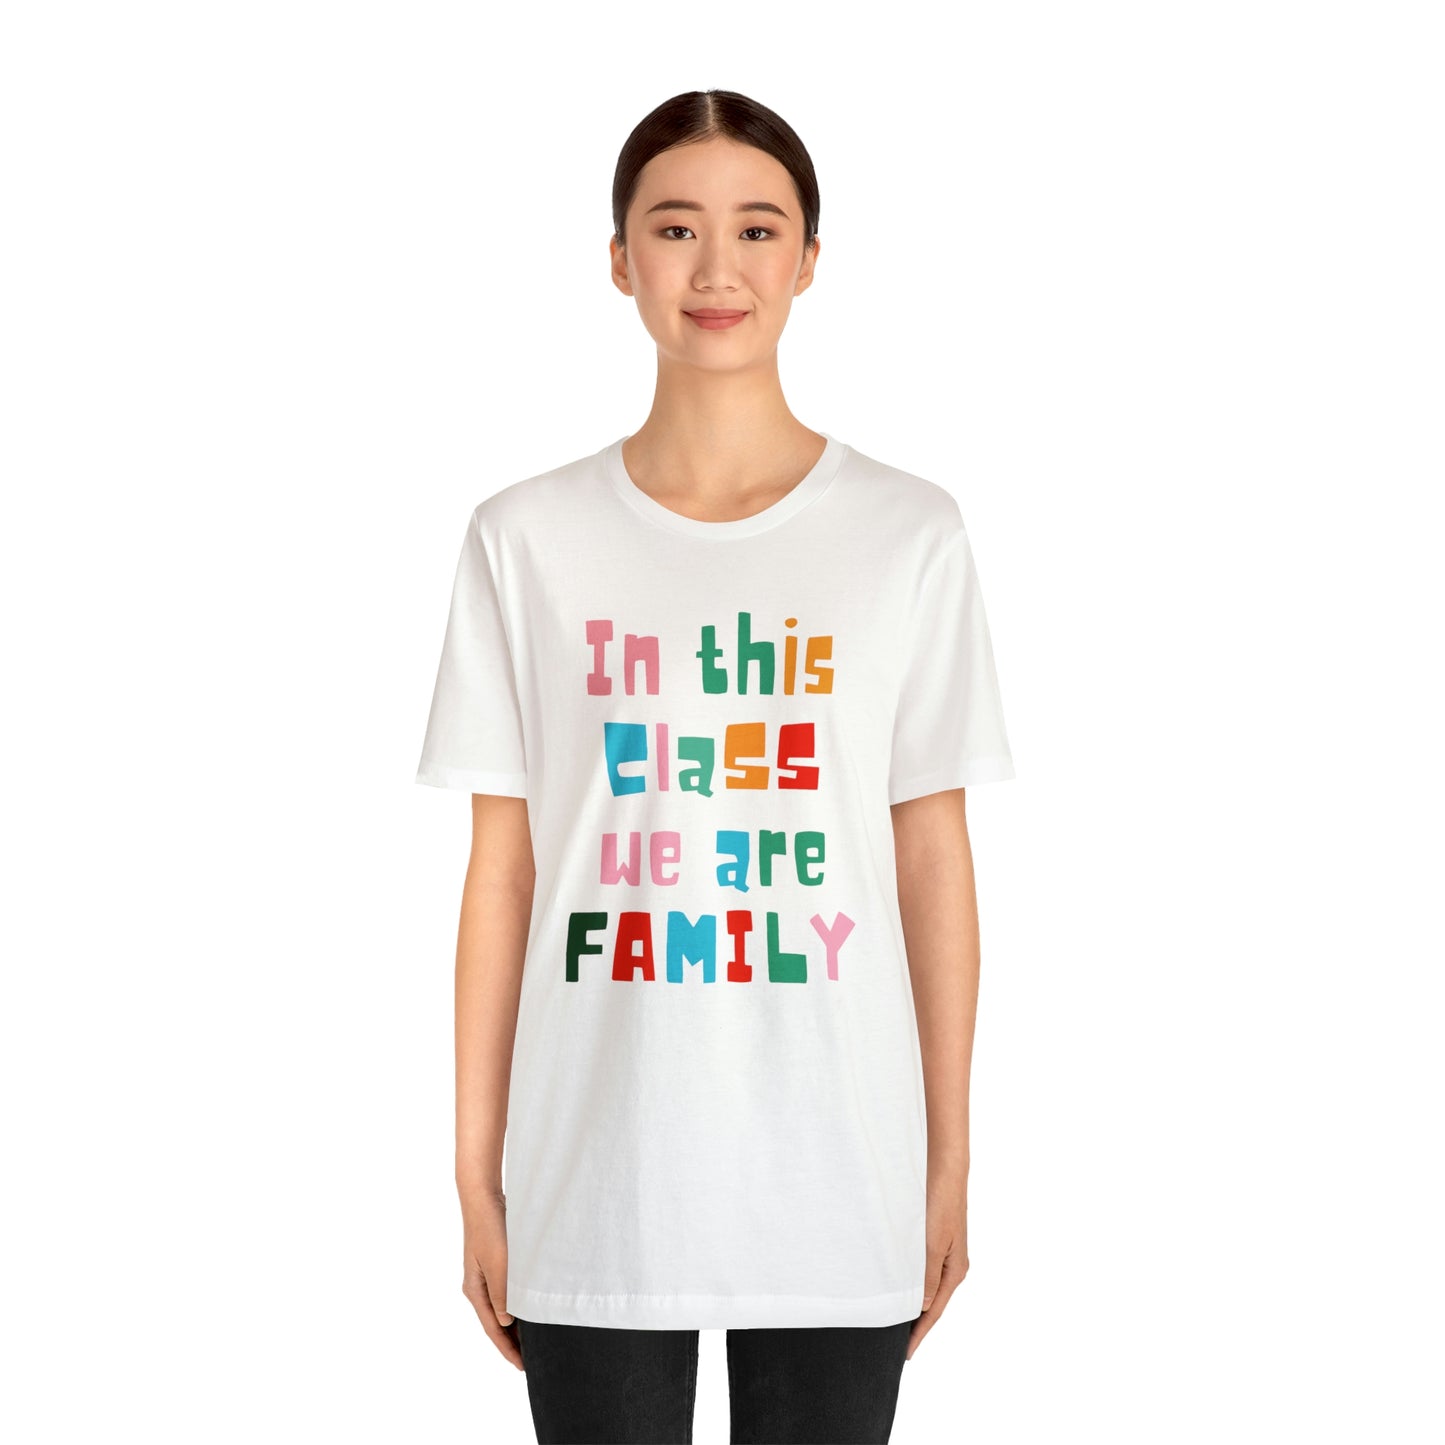 In This Class We Are a Family Unisex Jersey Short Sleeve Tee